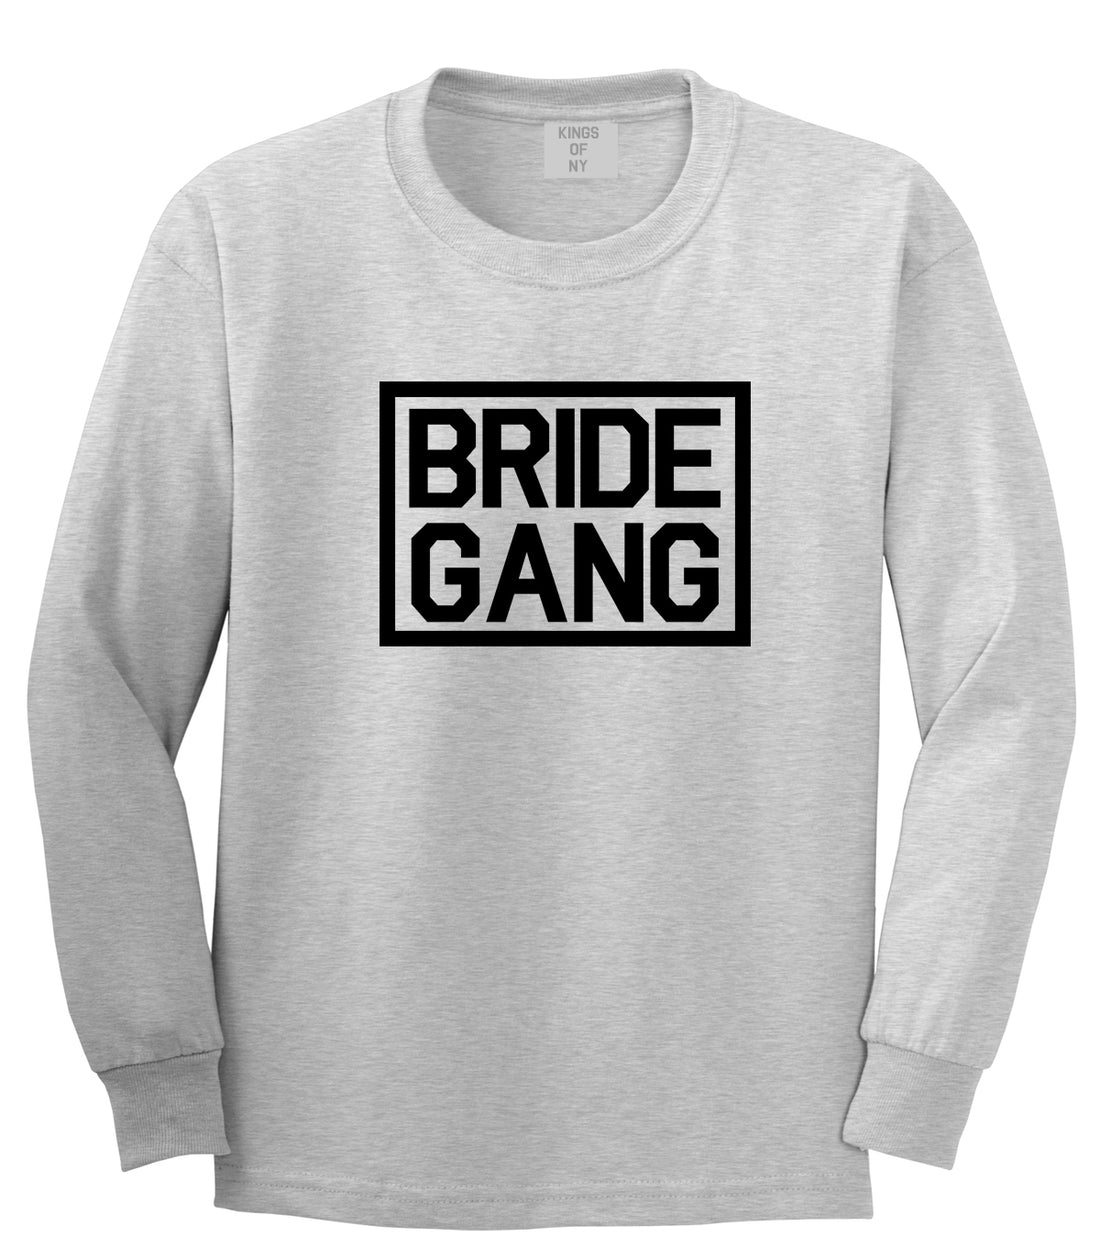 Bride Gang Bachlorette Party Grey Long Sleeve T-Shirt by Kings Of NY